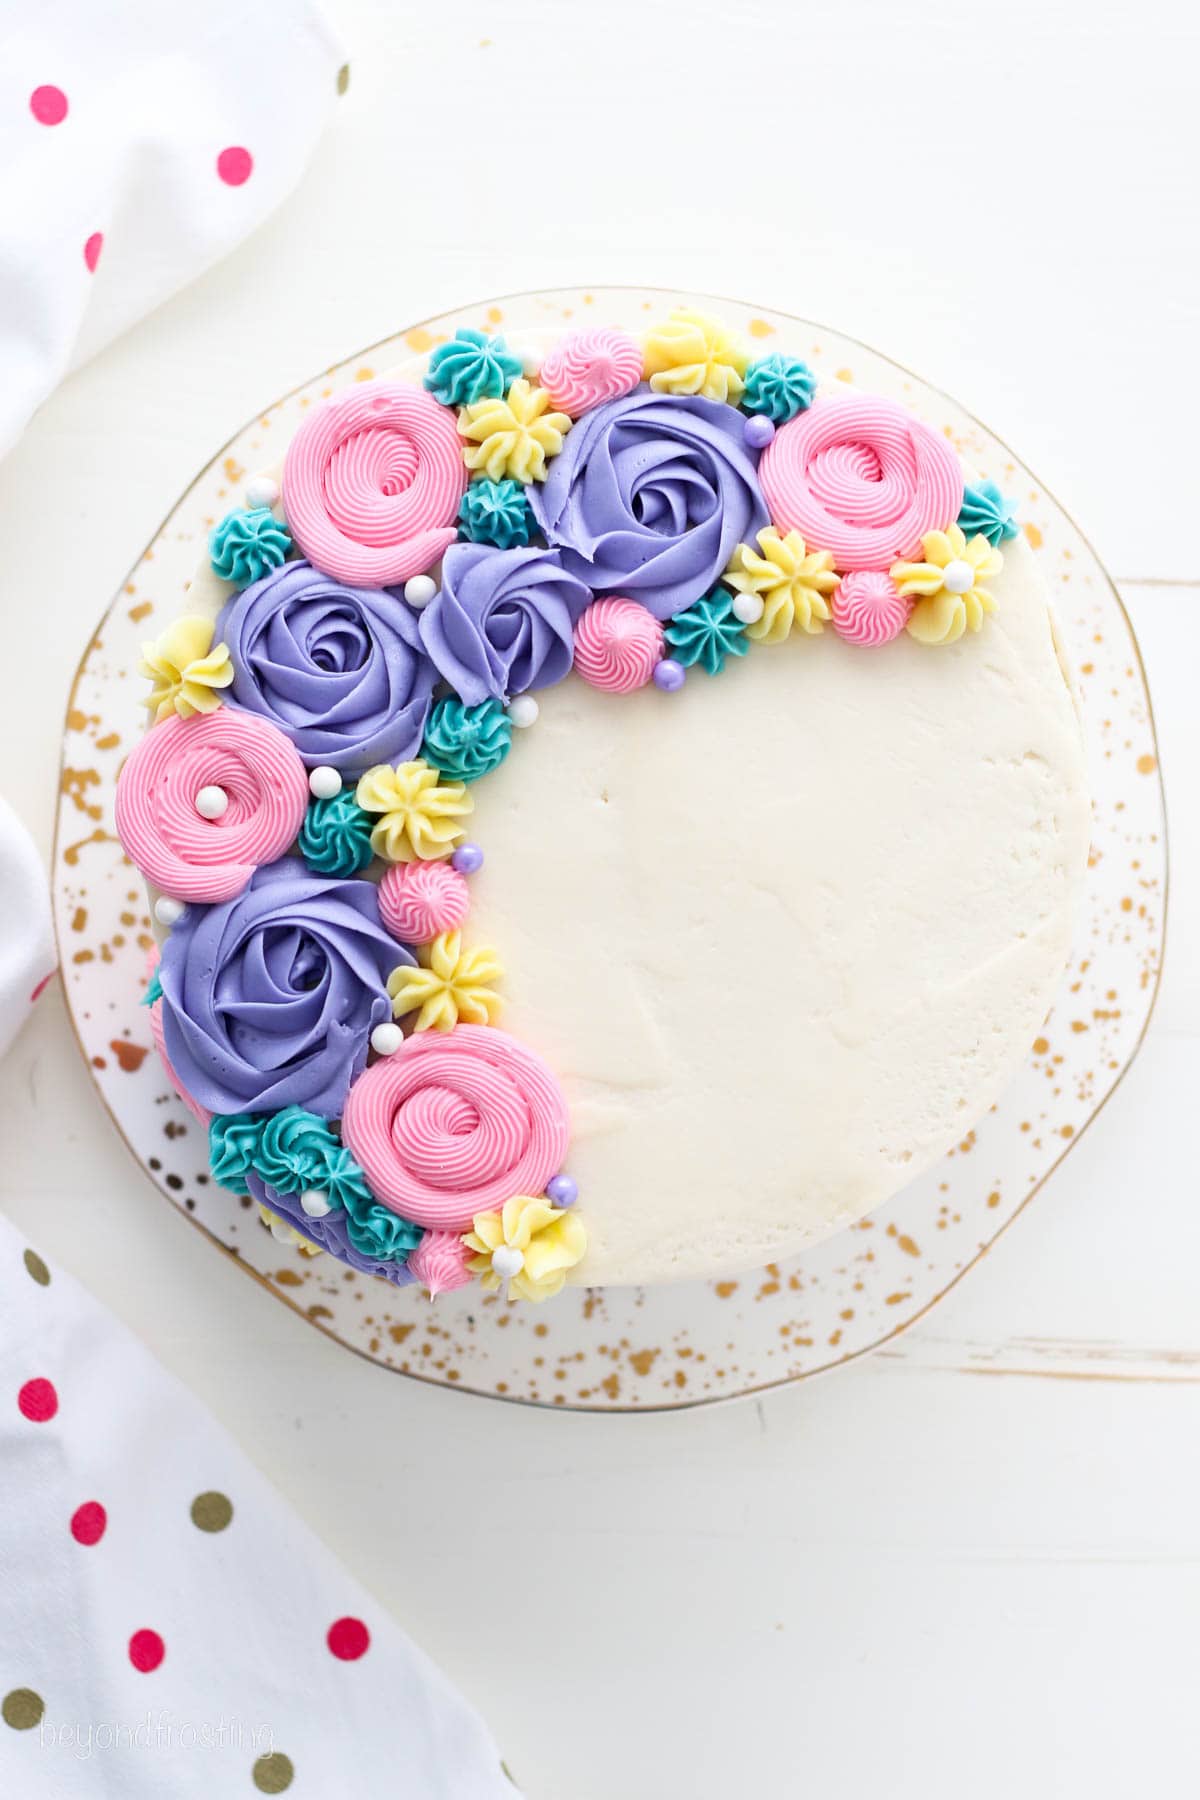 Overhead view of a buttercream flower cake decorated with pastel frosting rosettes and flowers.